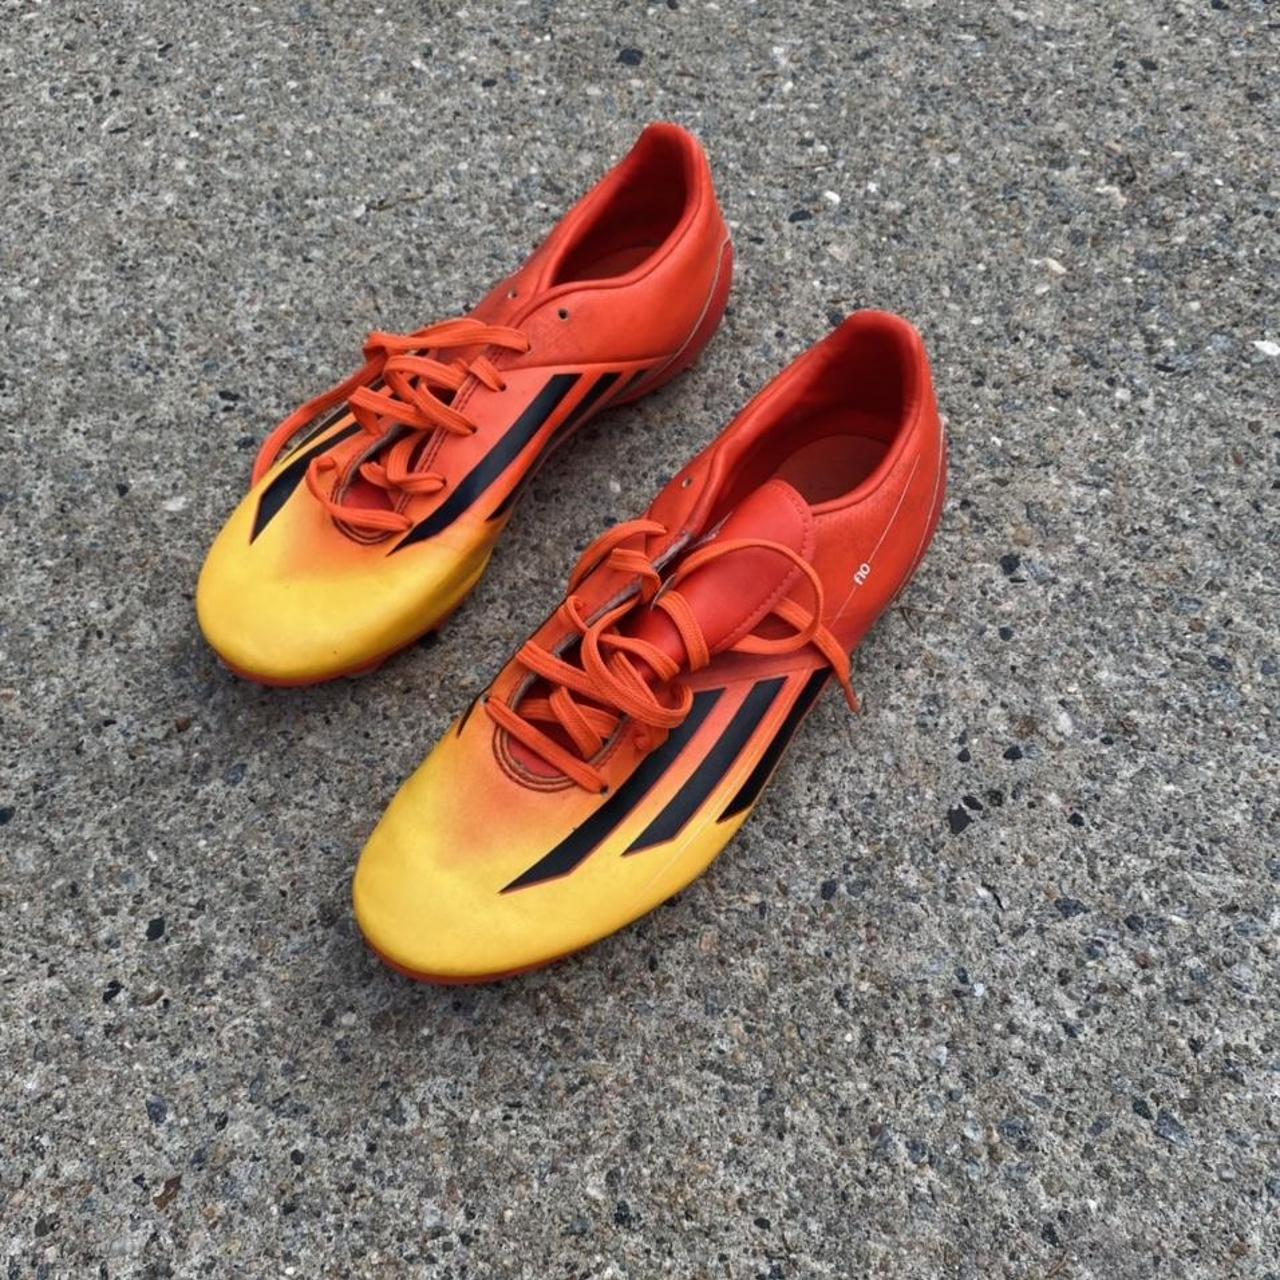 Product Image 1 - Adidas x Messi f10 fire